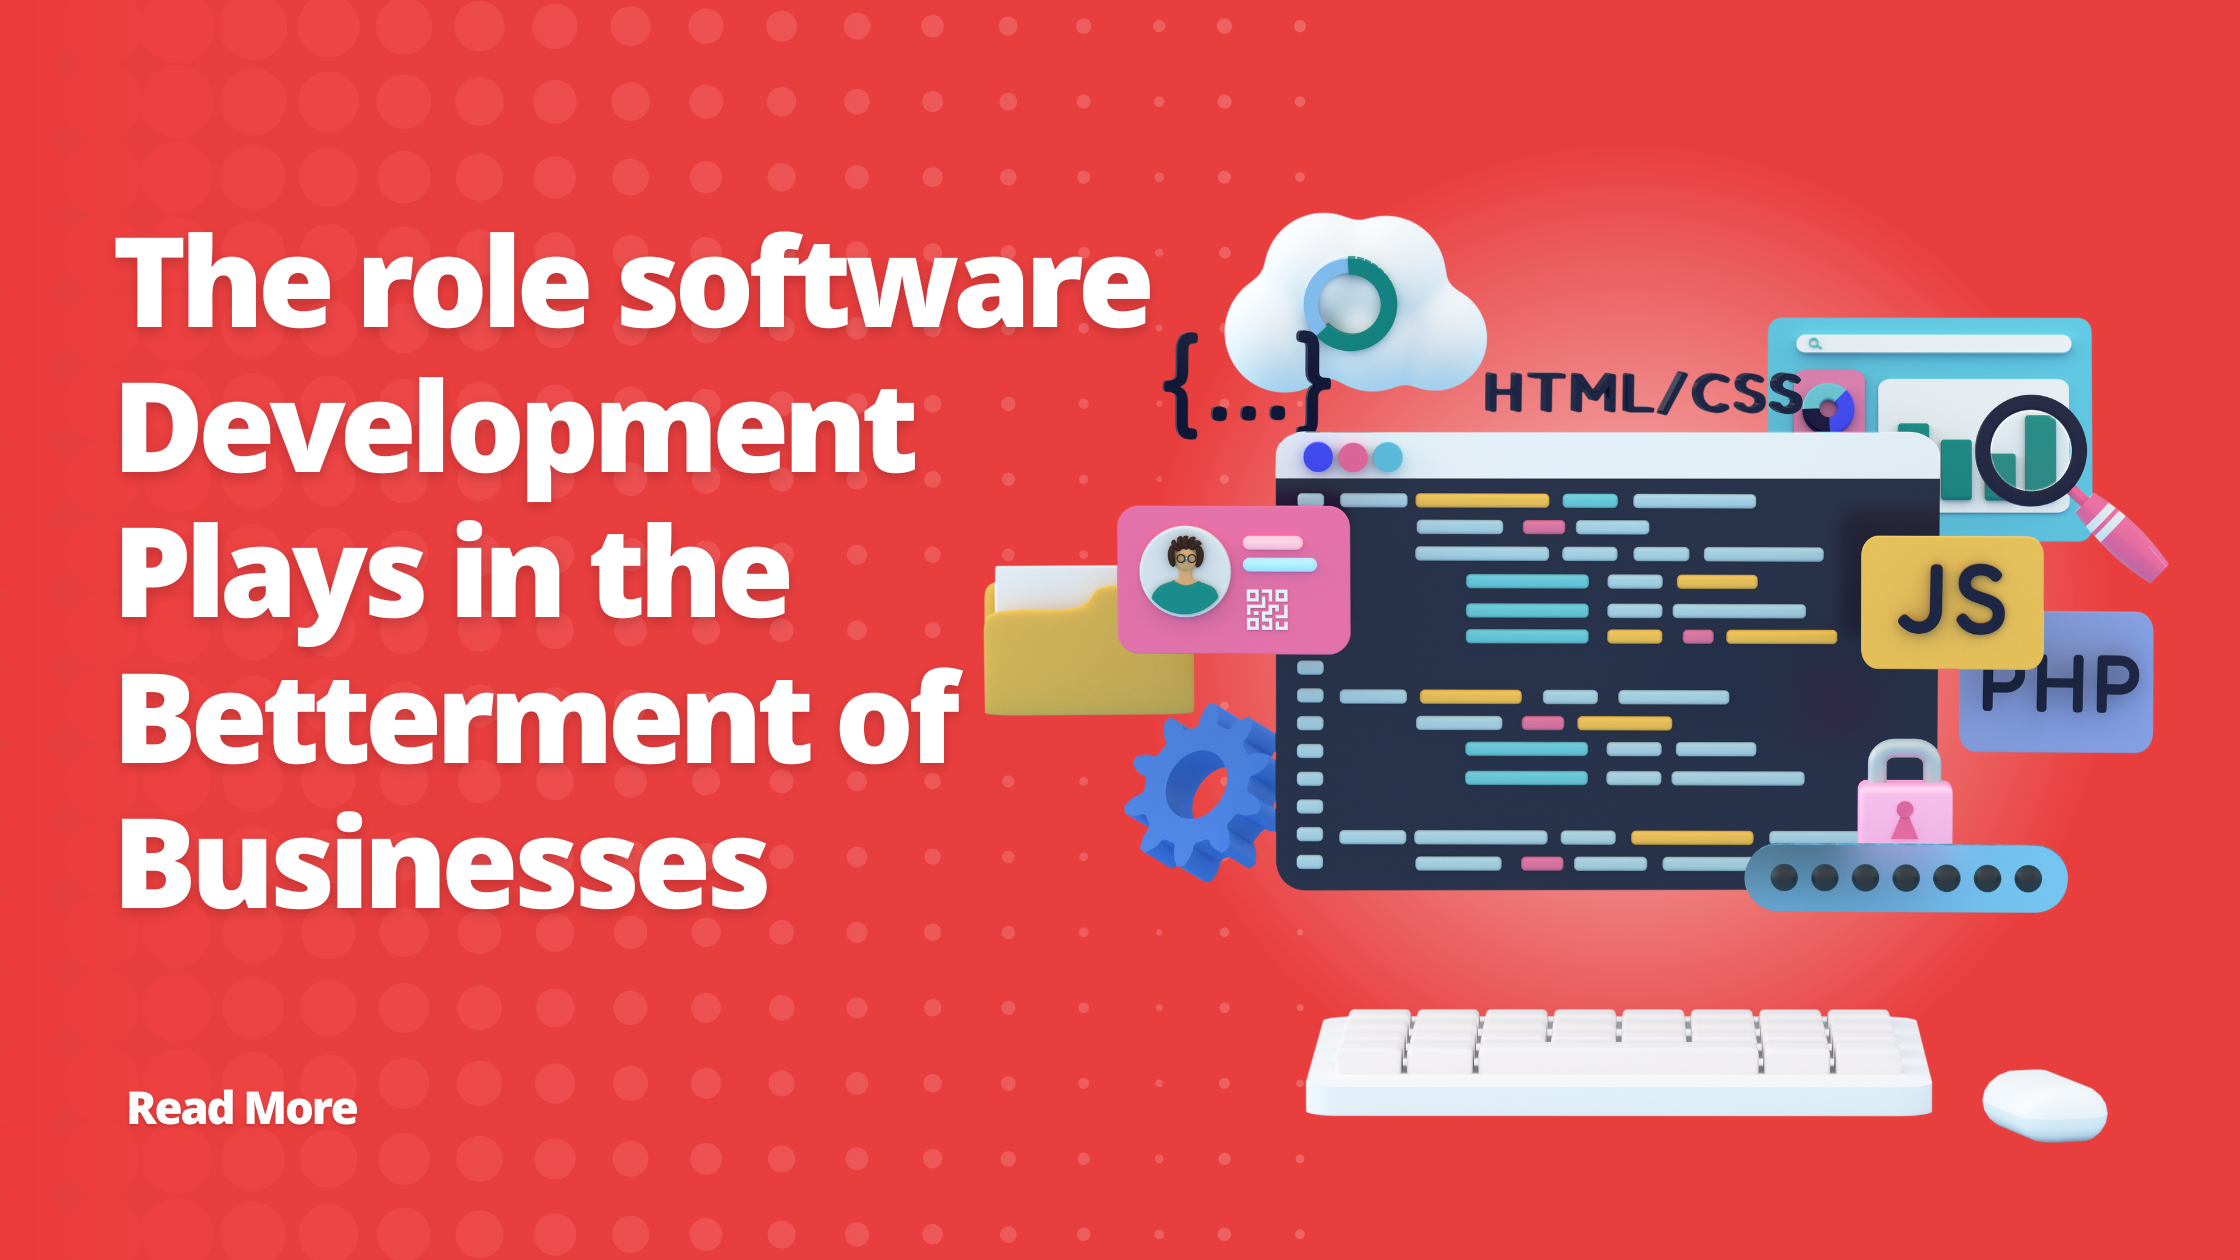 The role software development plays in the betterment of businesses | TechPlanet